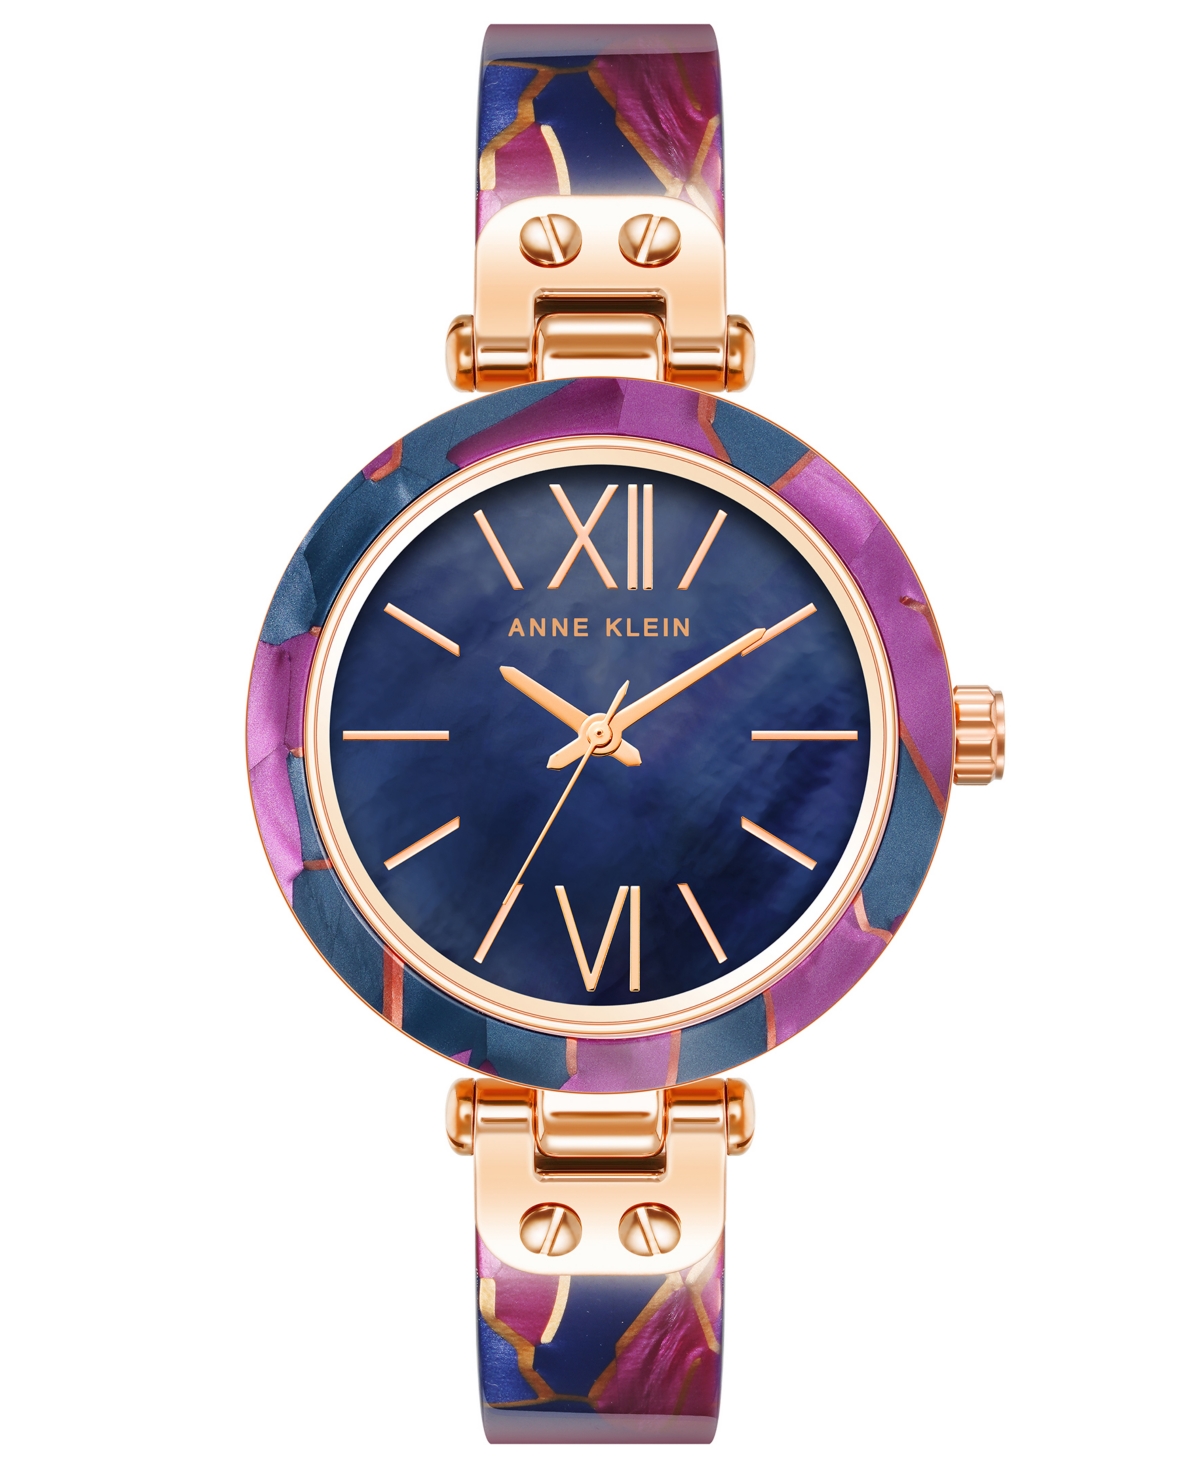 Anne Klein Women's Three-hand Quartz Navy And Purple Resin With Rose Gold-tone Alloy Accents Bangle Watch, 34mm In Rose Gold-tone,navy,purple